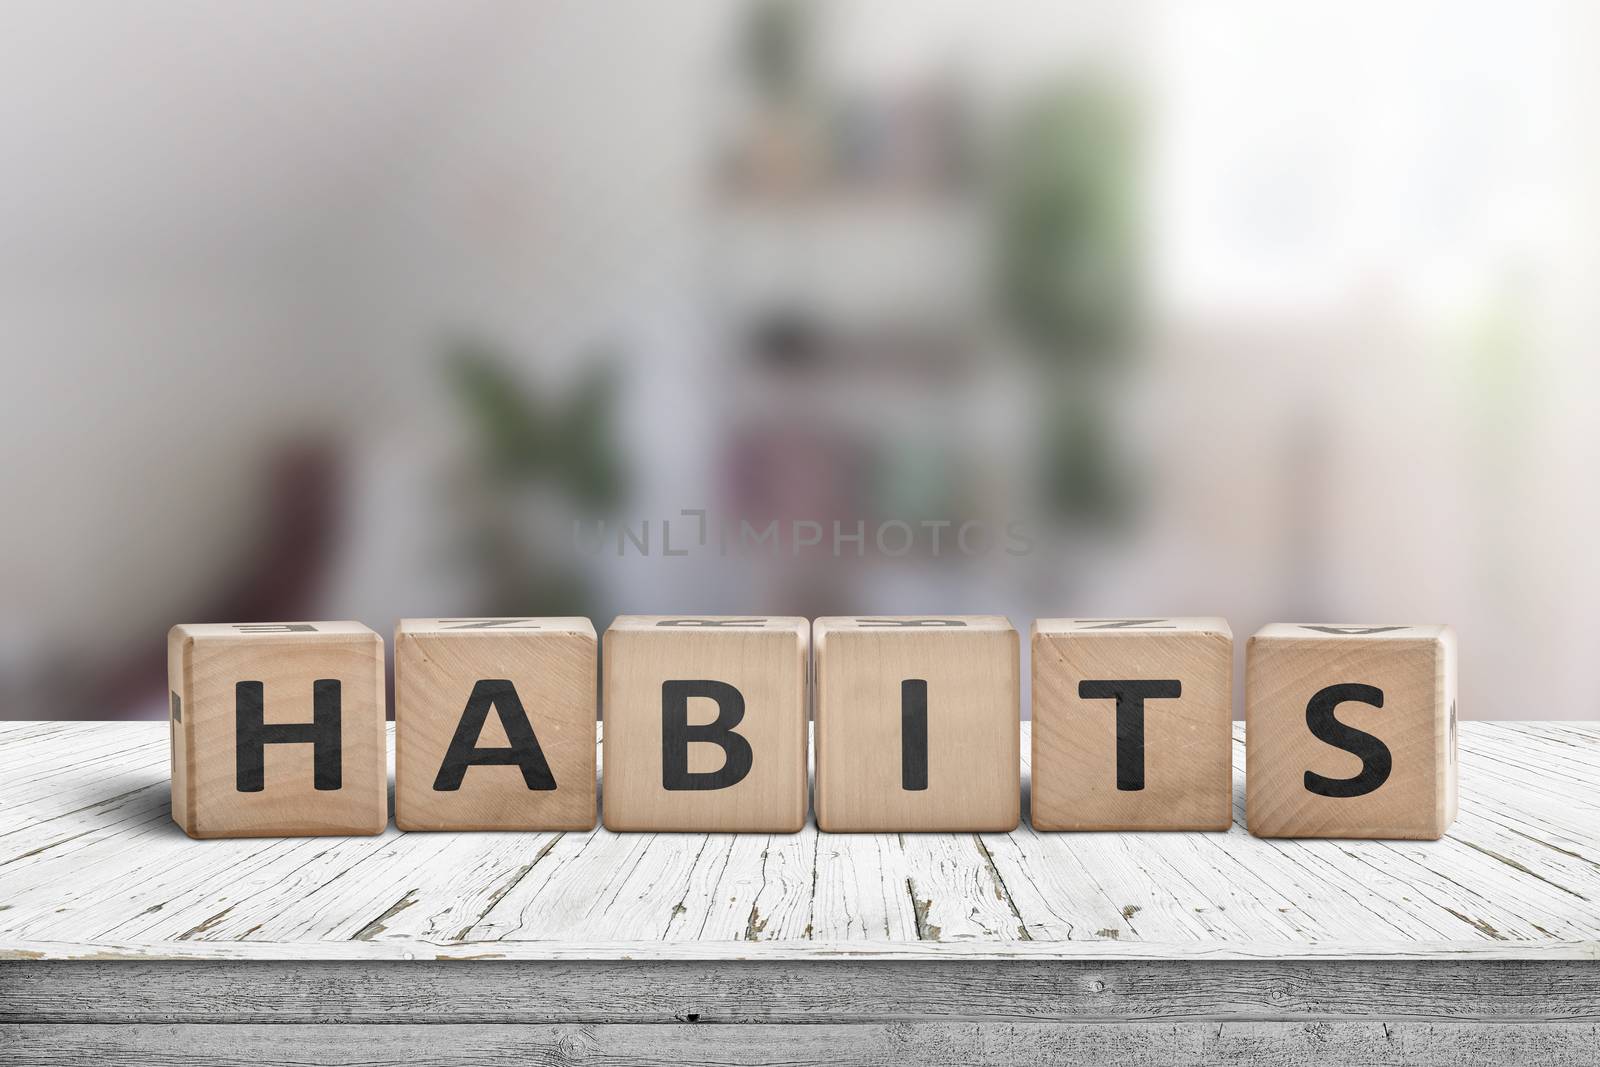 What is your habits? Sign with the word habits by Sportactive